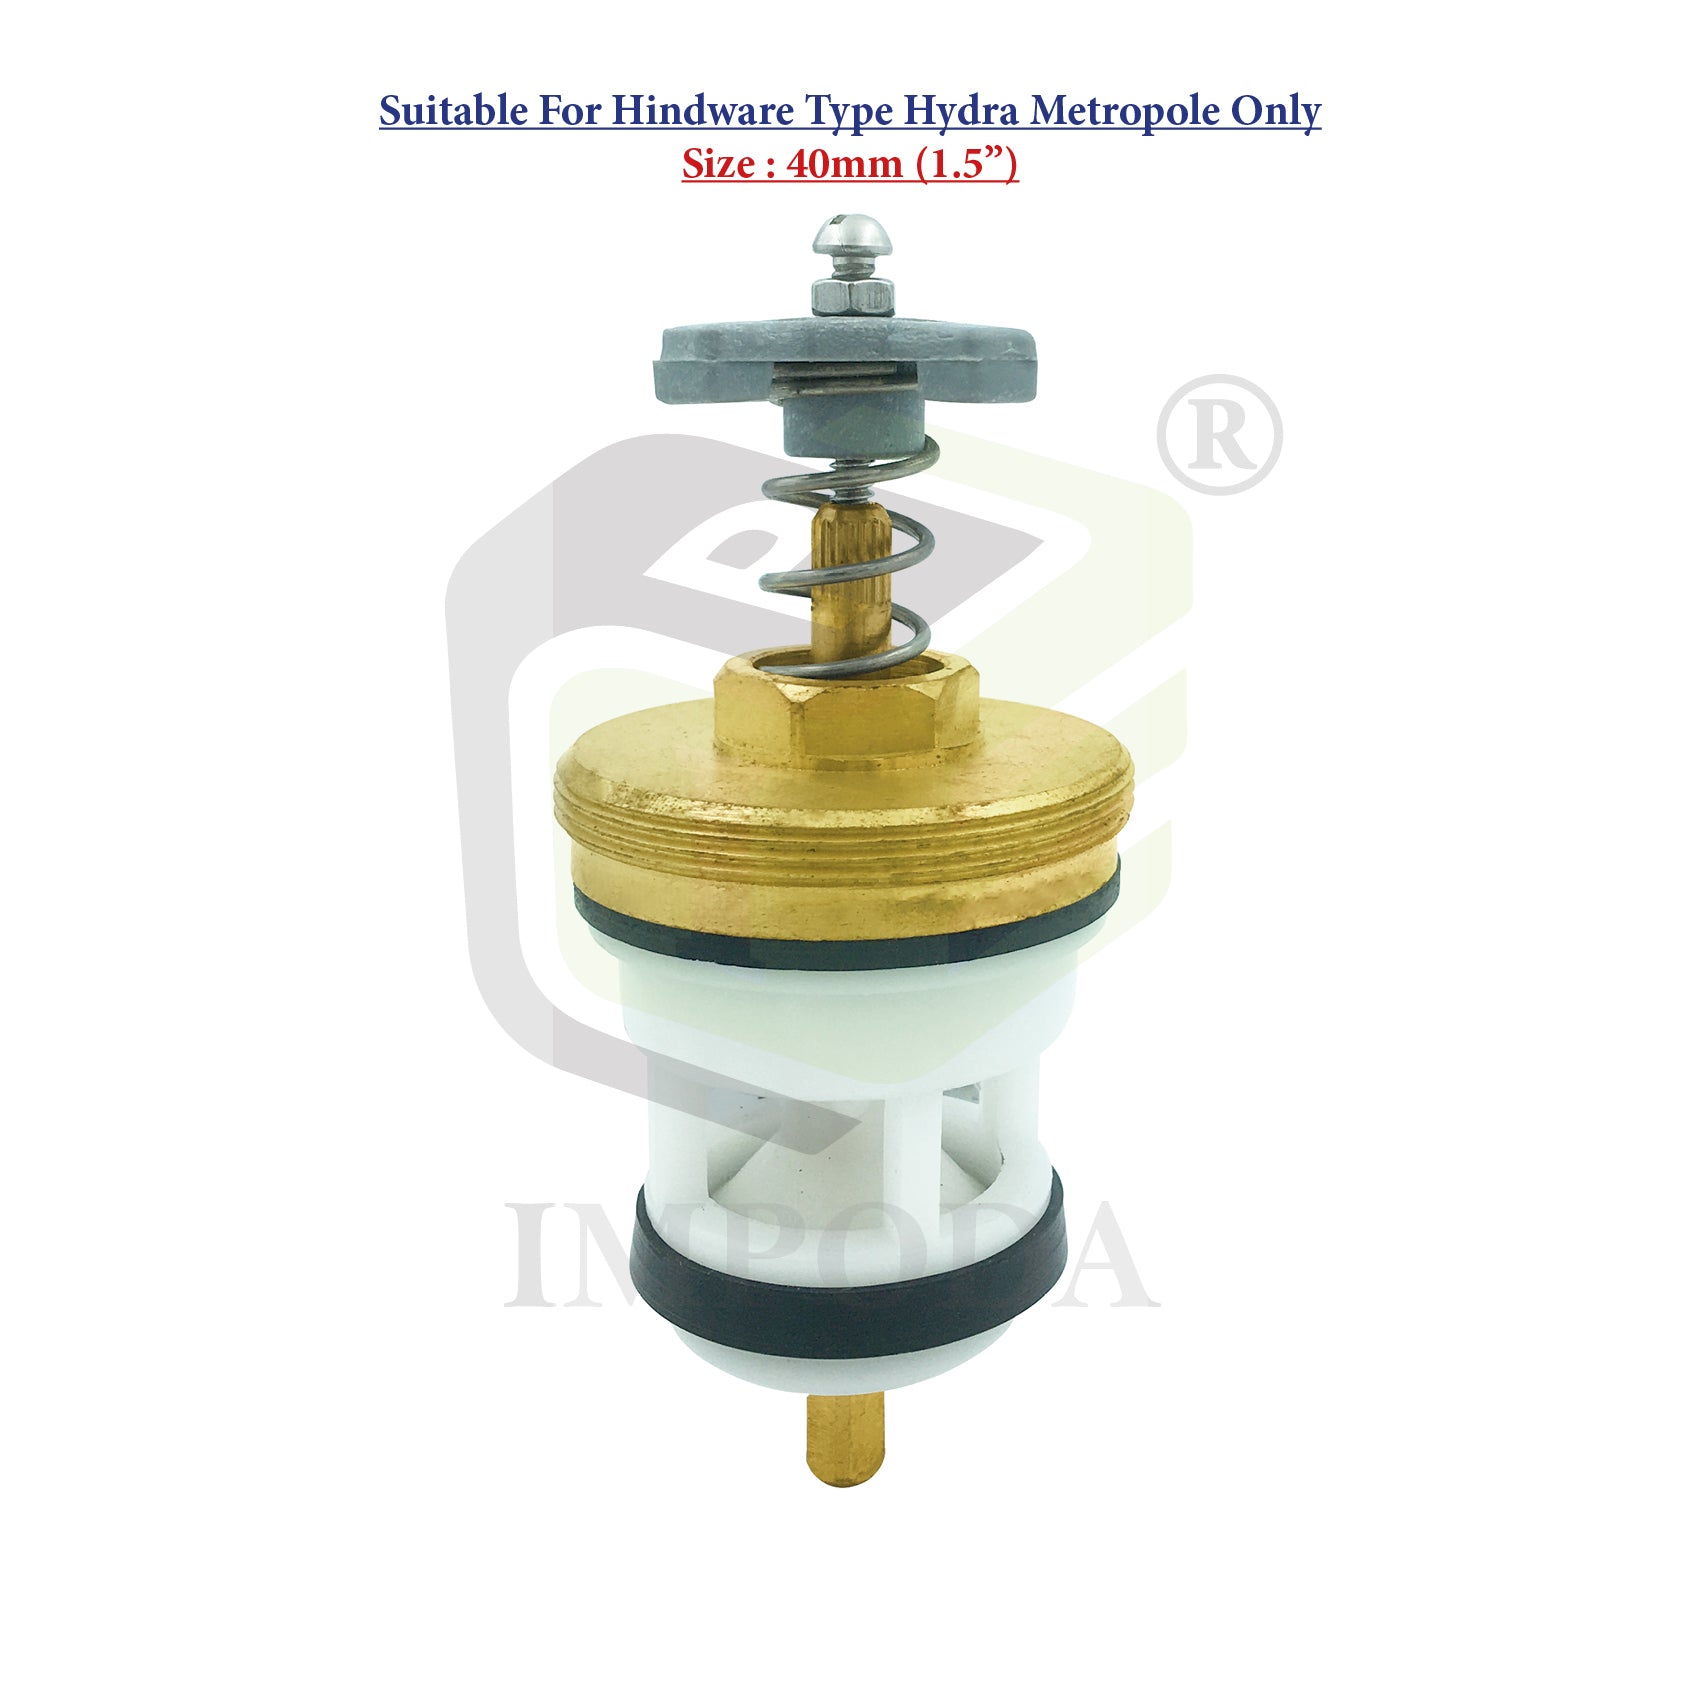 Hindware Type Hydra Metropole Fittings Size 40mm (1.5")/IMP-1908